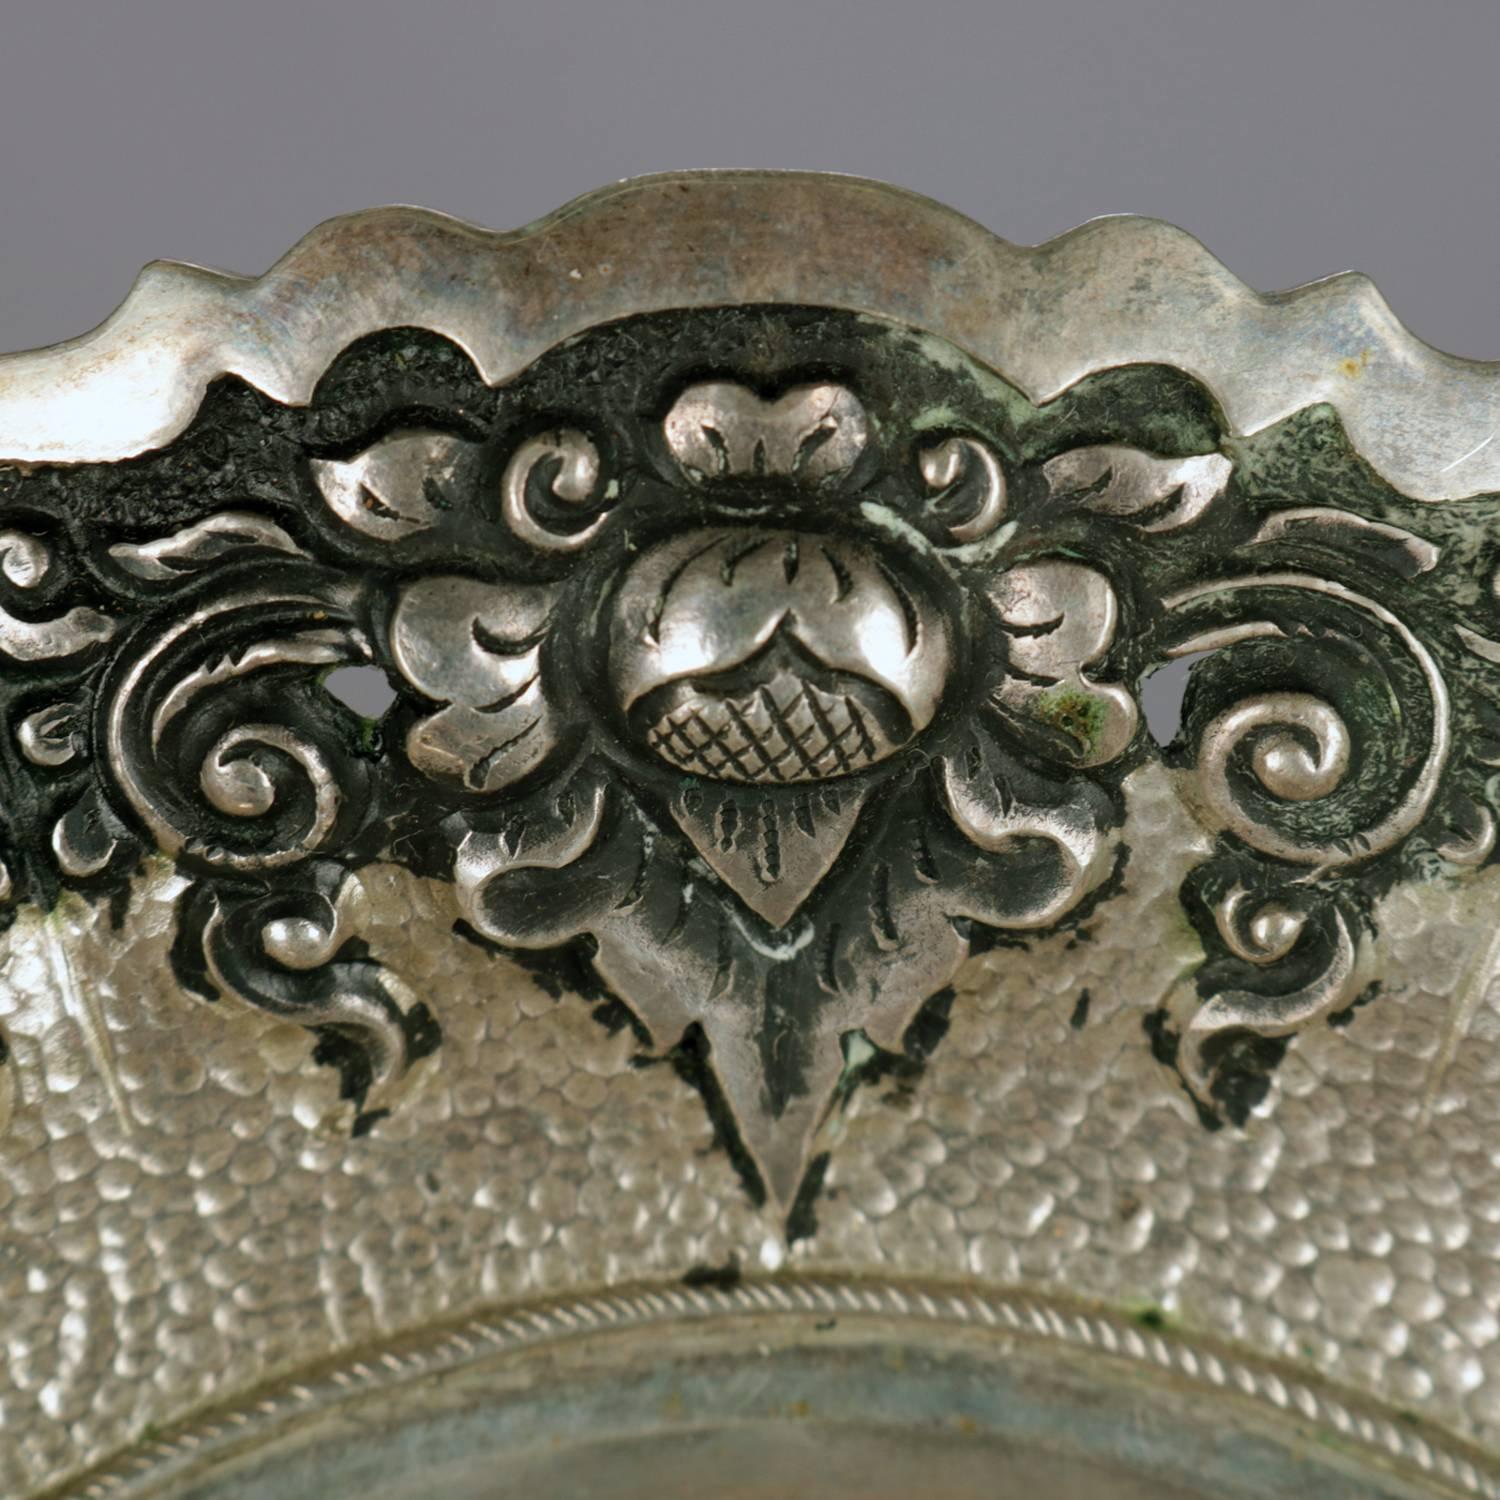 Continental .800 silver bride's basket features reticulated floral and scroll repousse border, swivel handle, en verso and handle marked .800, 5.49 toz, circa 1890

Measures: up 5